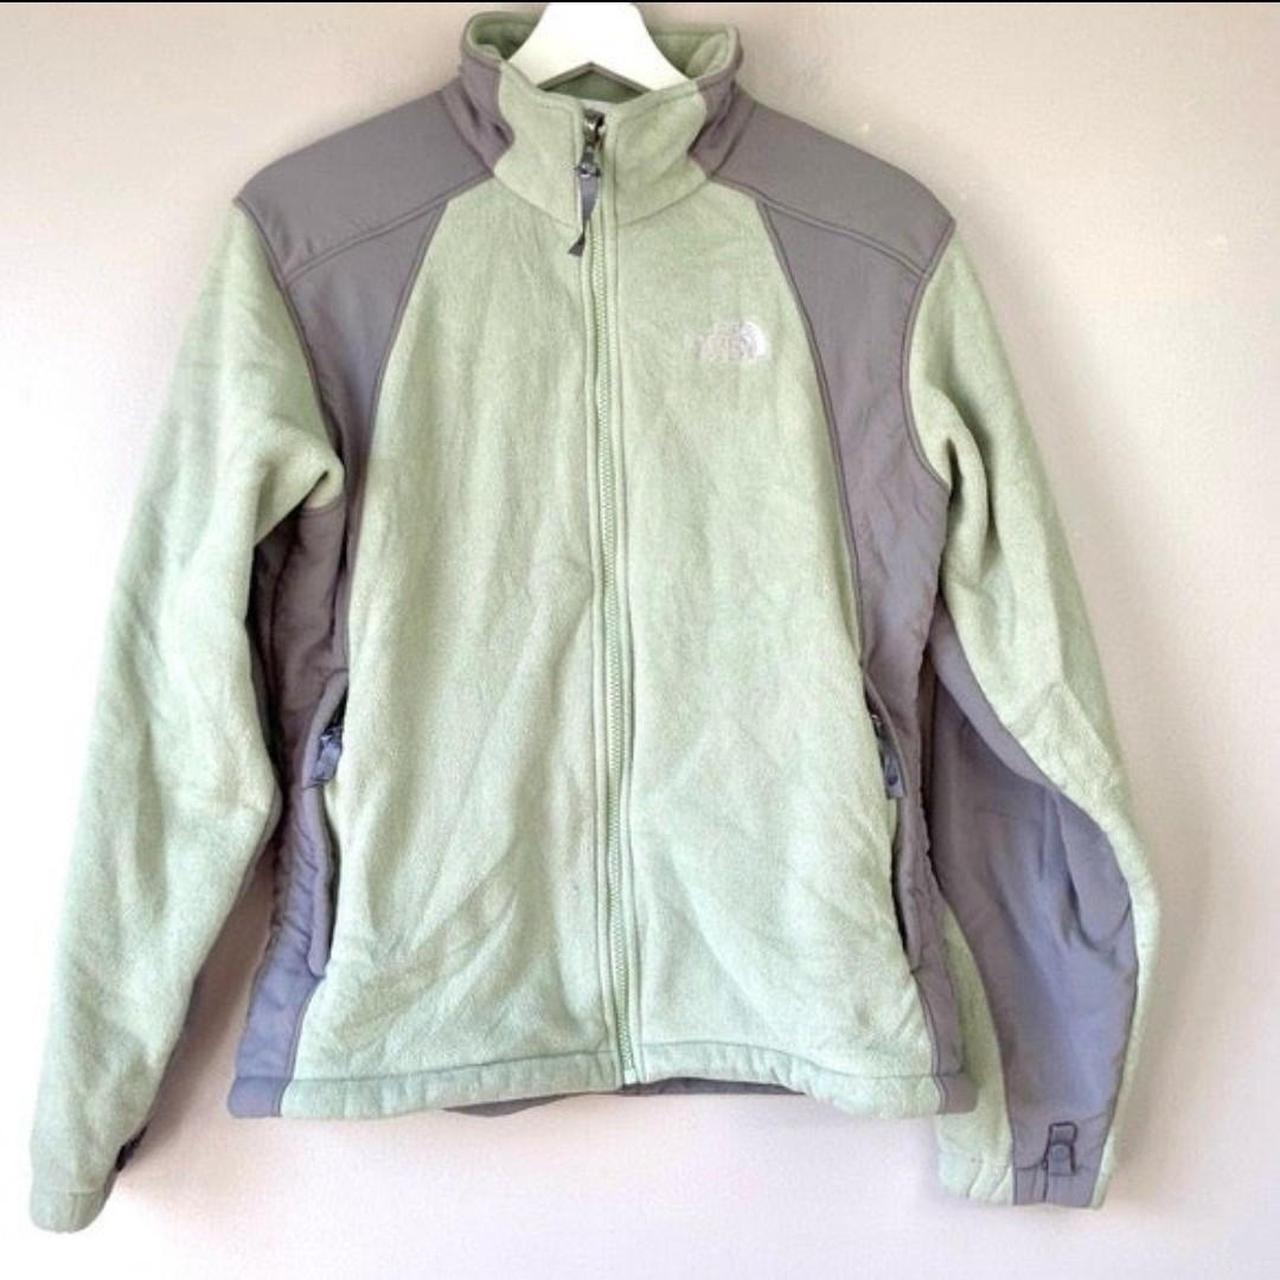 The North Face Women's Green and Grey Jacket